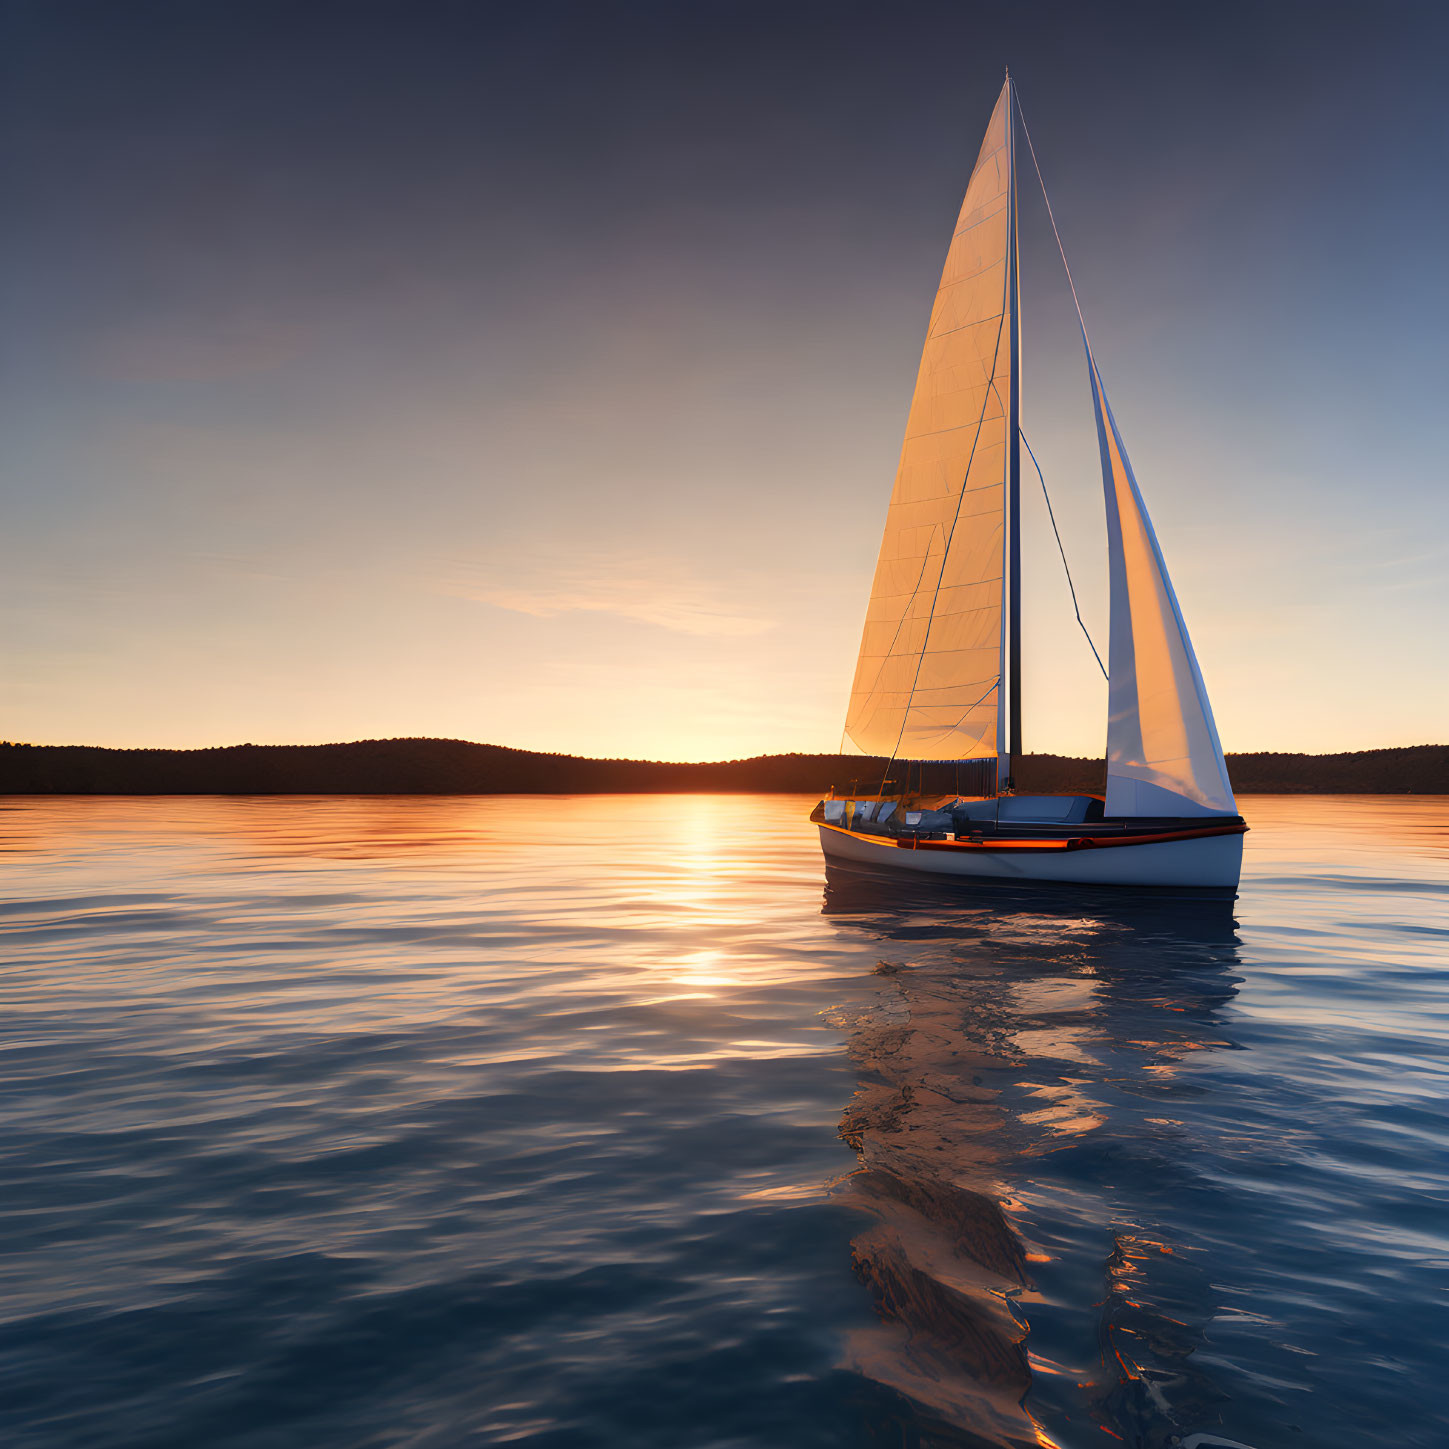 Sailboat on calm waters at sunset with reflections and clear sky gradating from orange to blue.